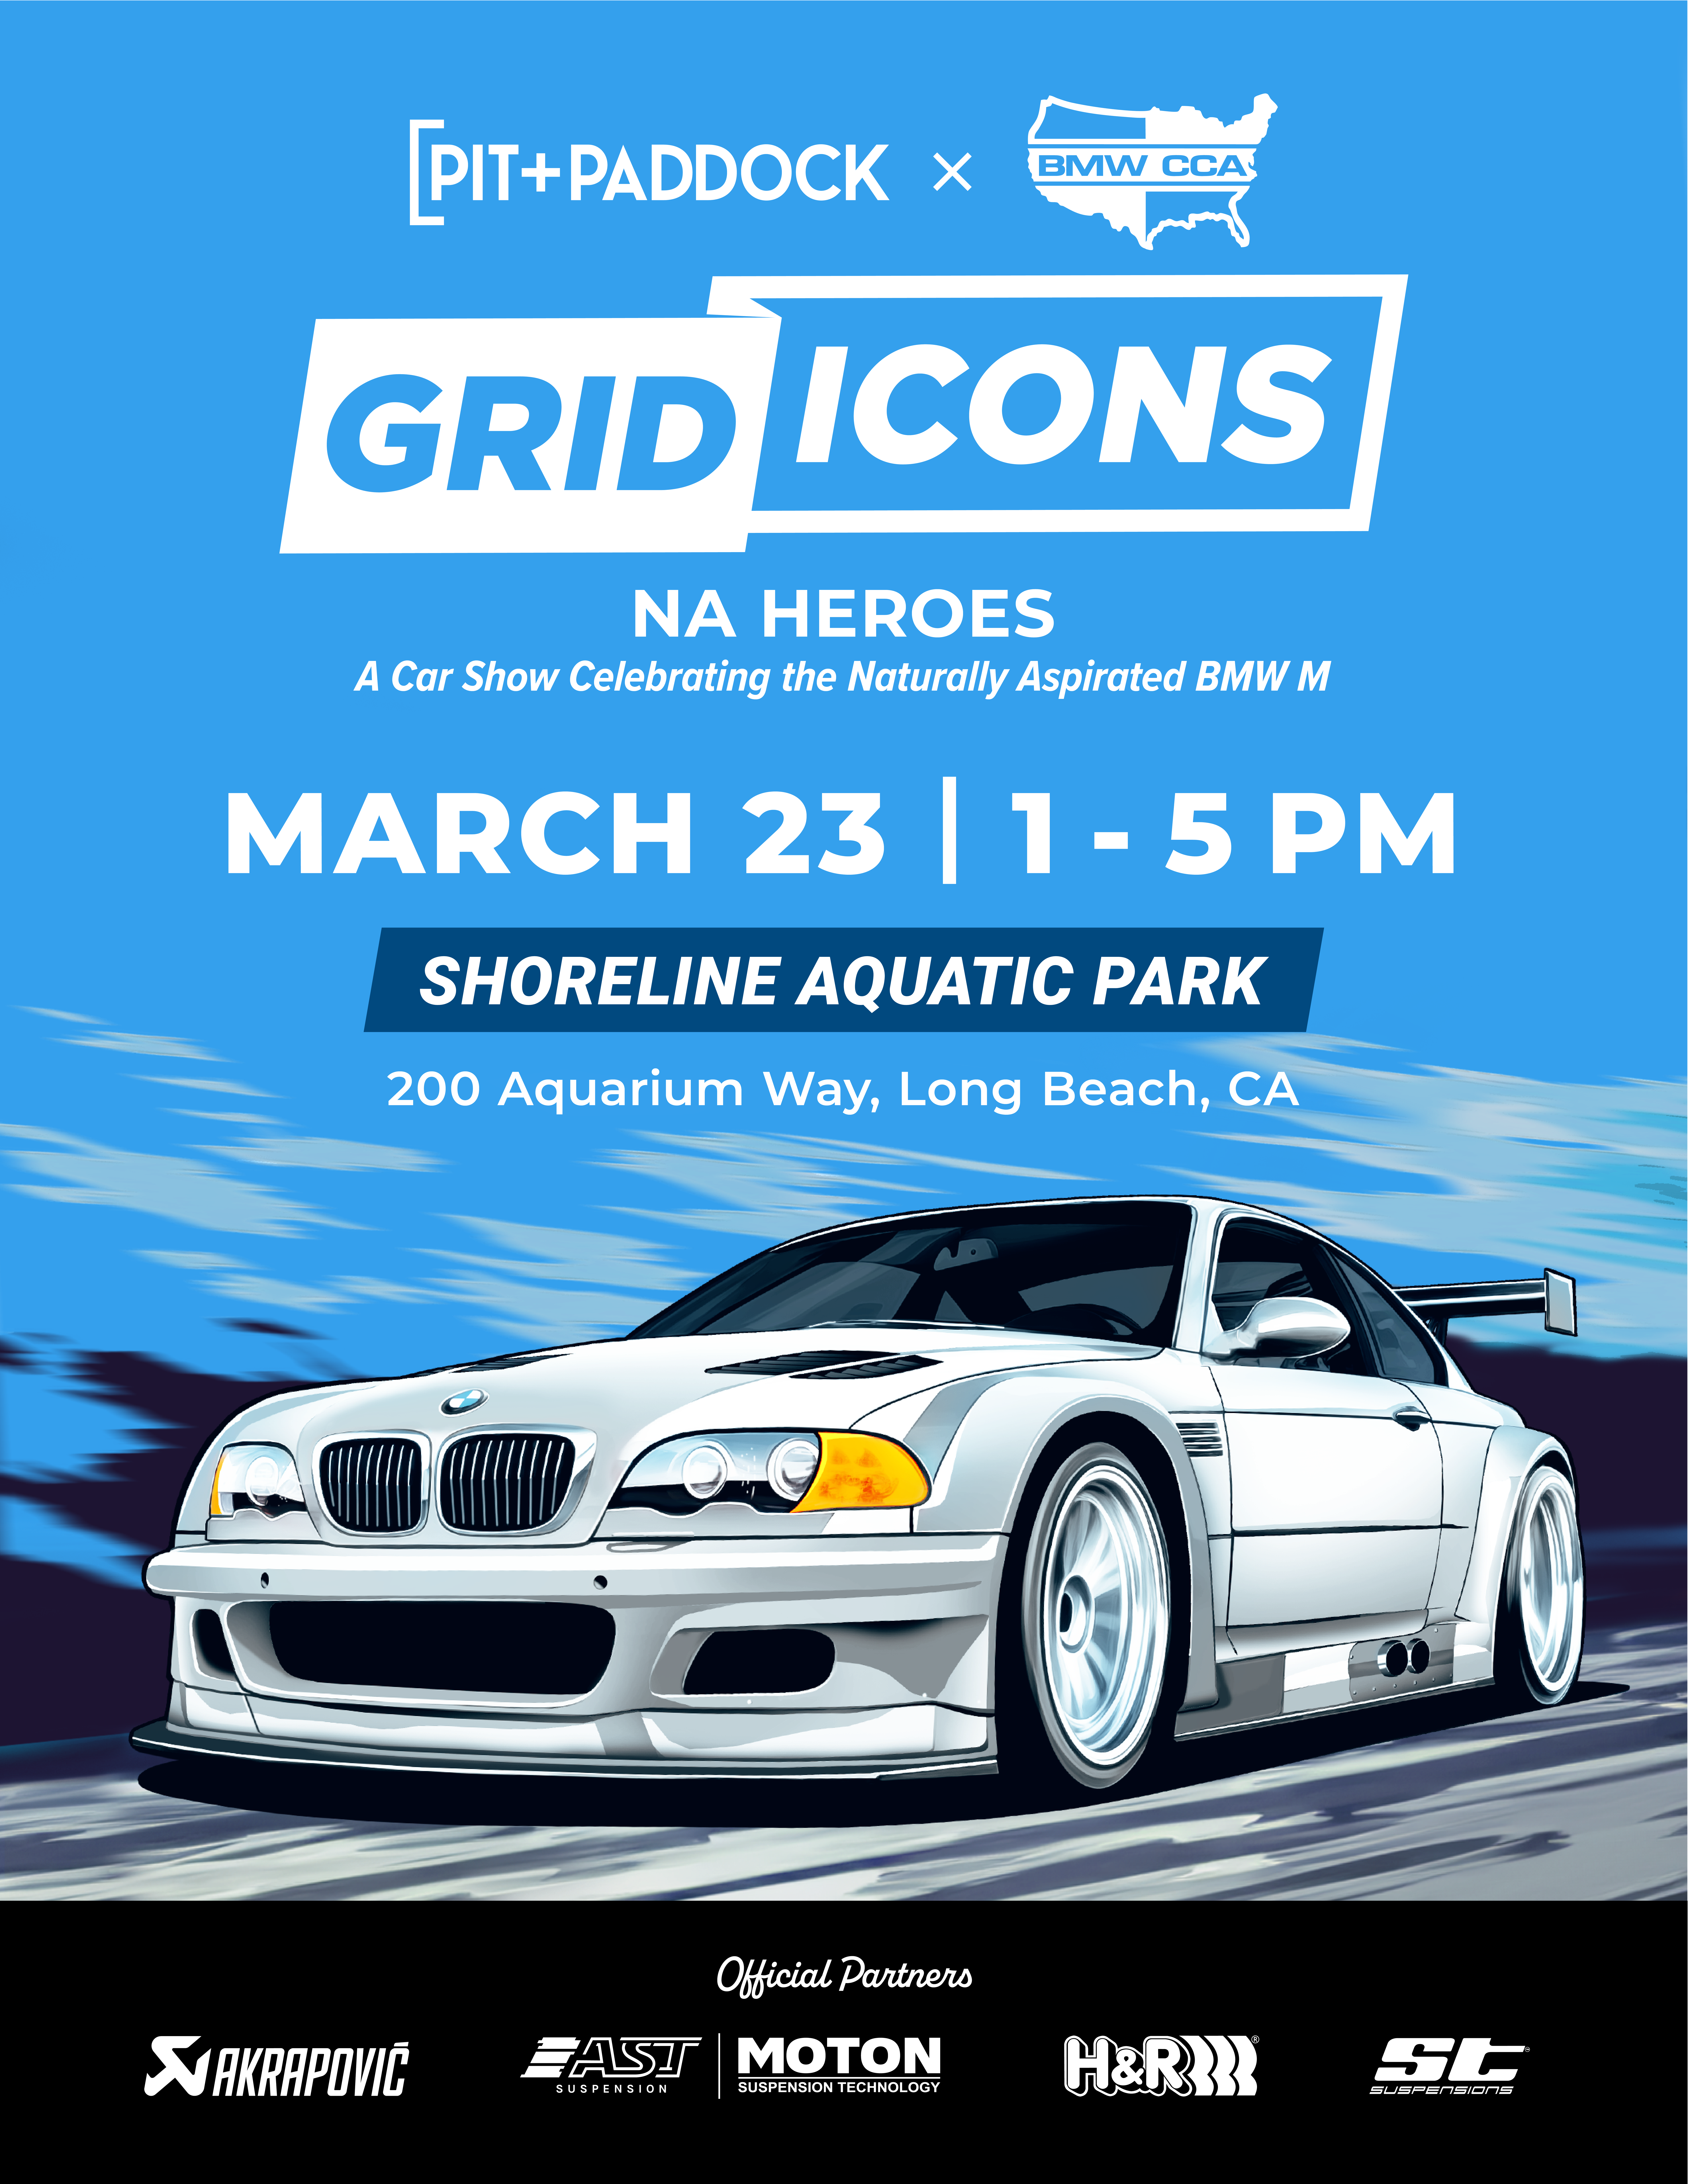 Learn more about the Grid Icons Event!